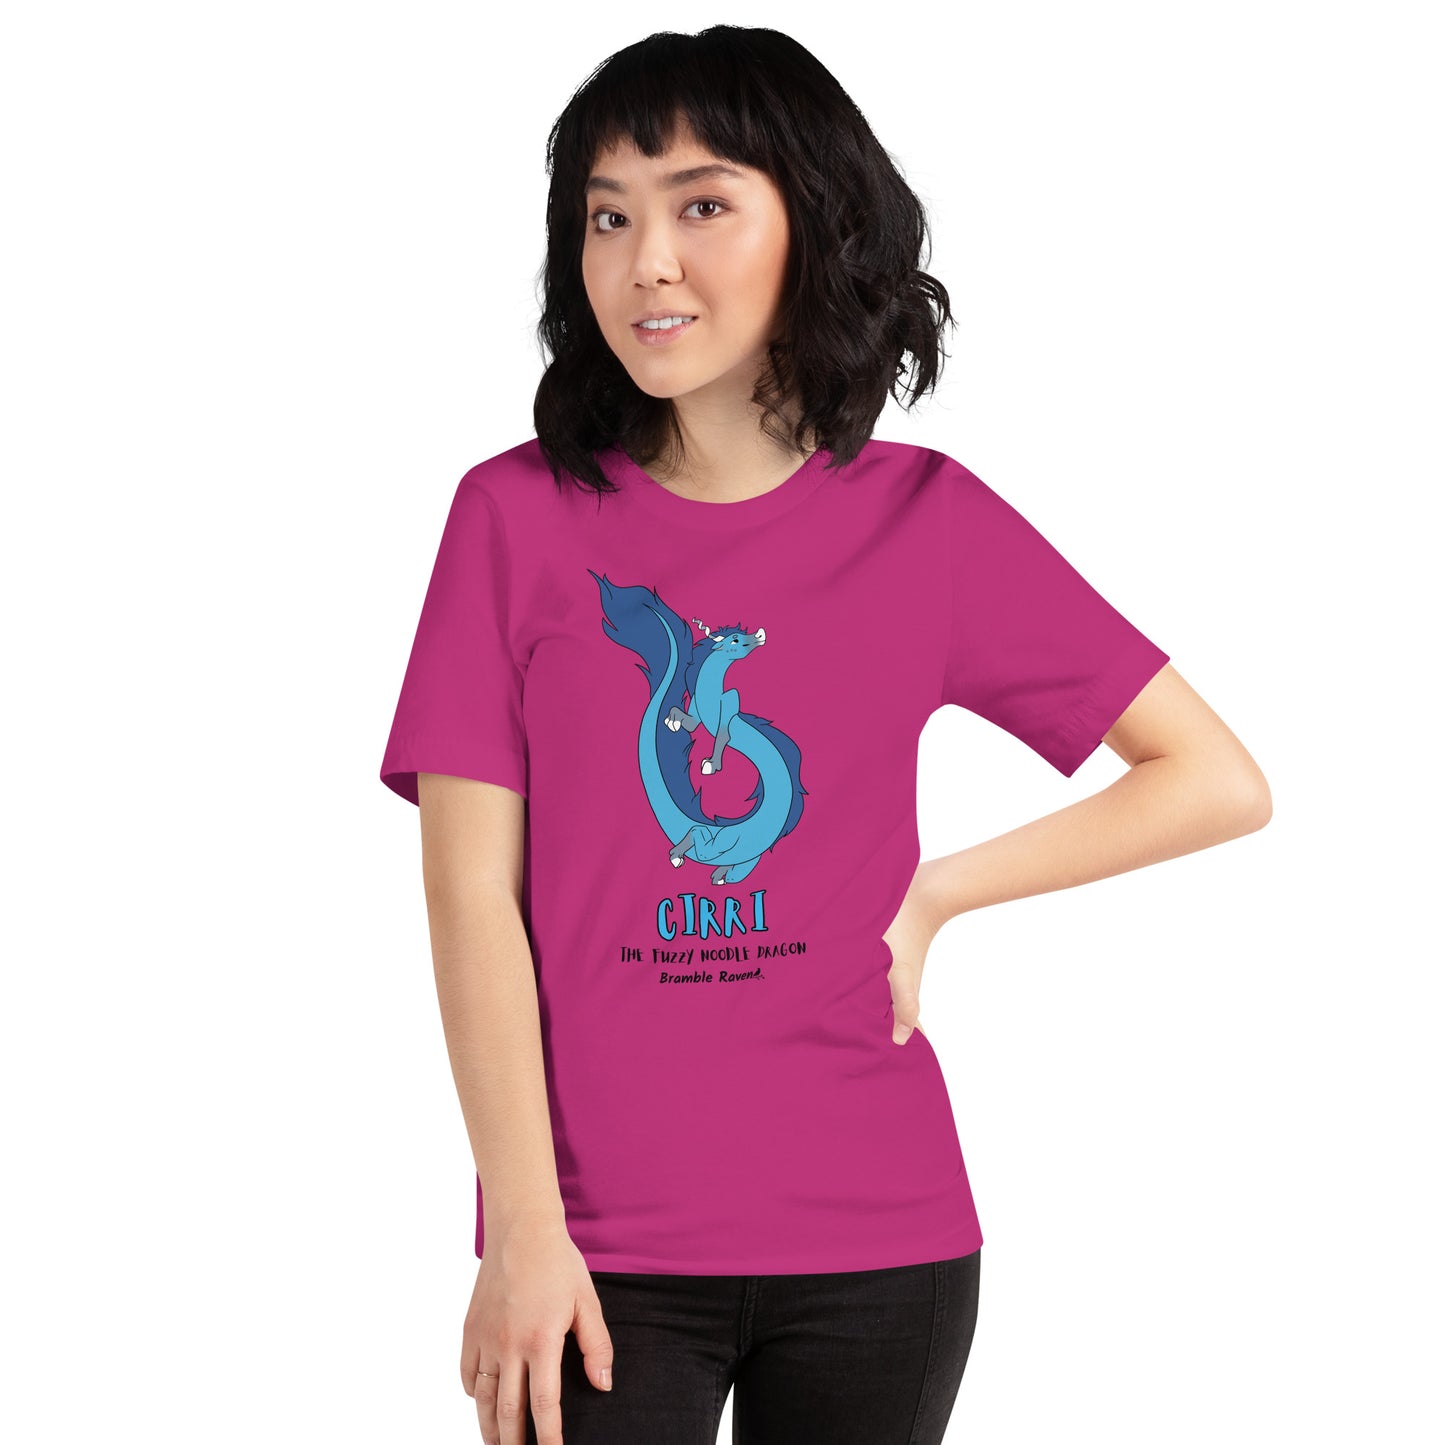 Cirri the Fuzzy Noodle Dragon on a berry pink unisex t-shirt. Shown on a female model.